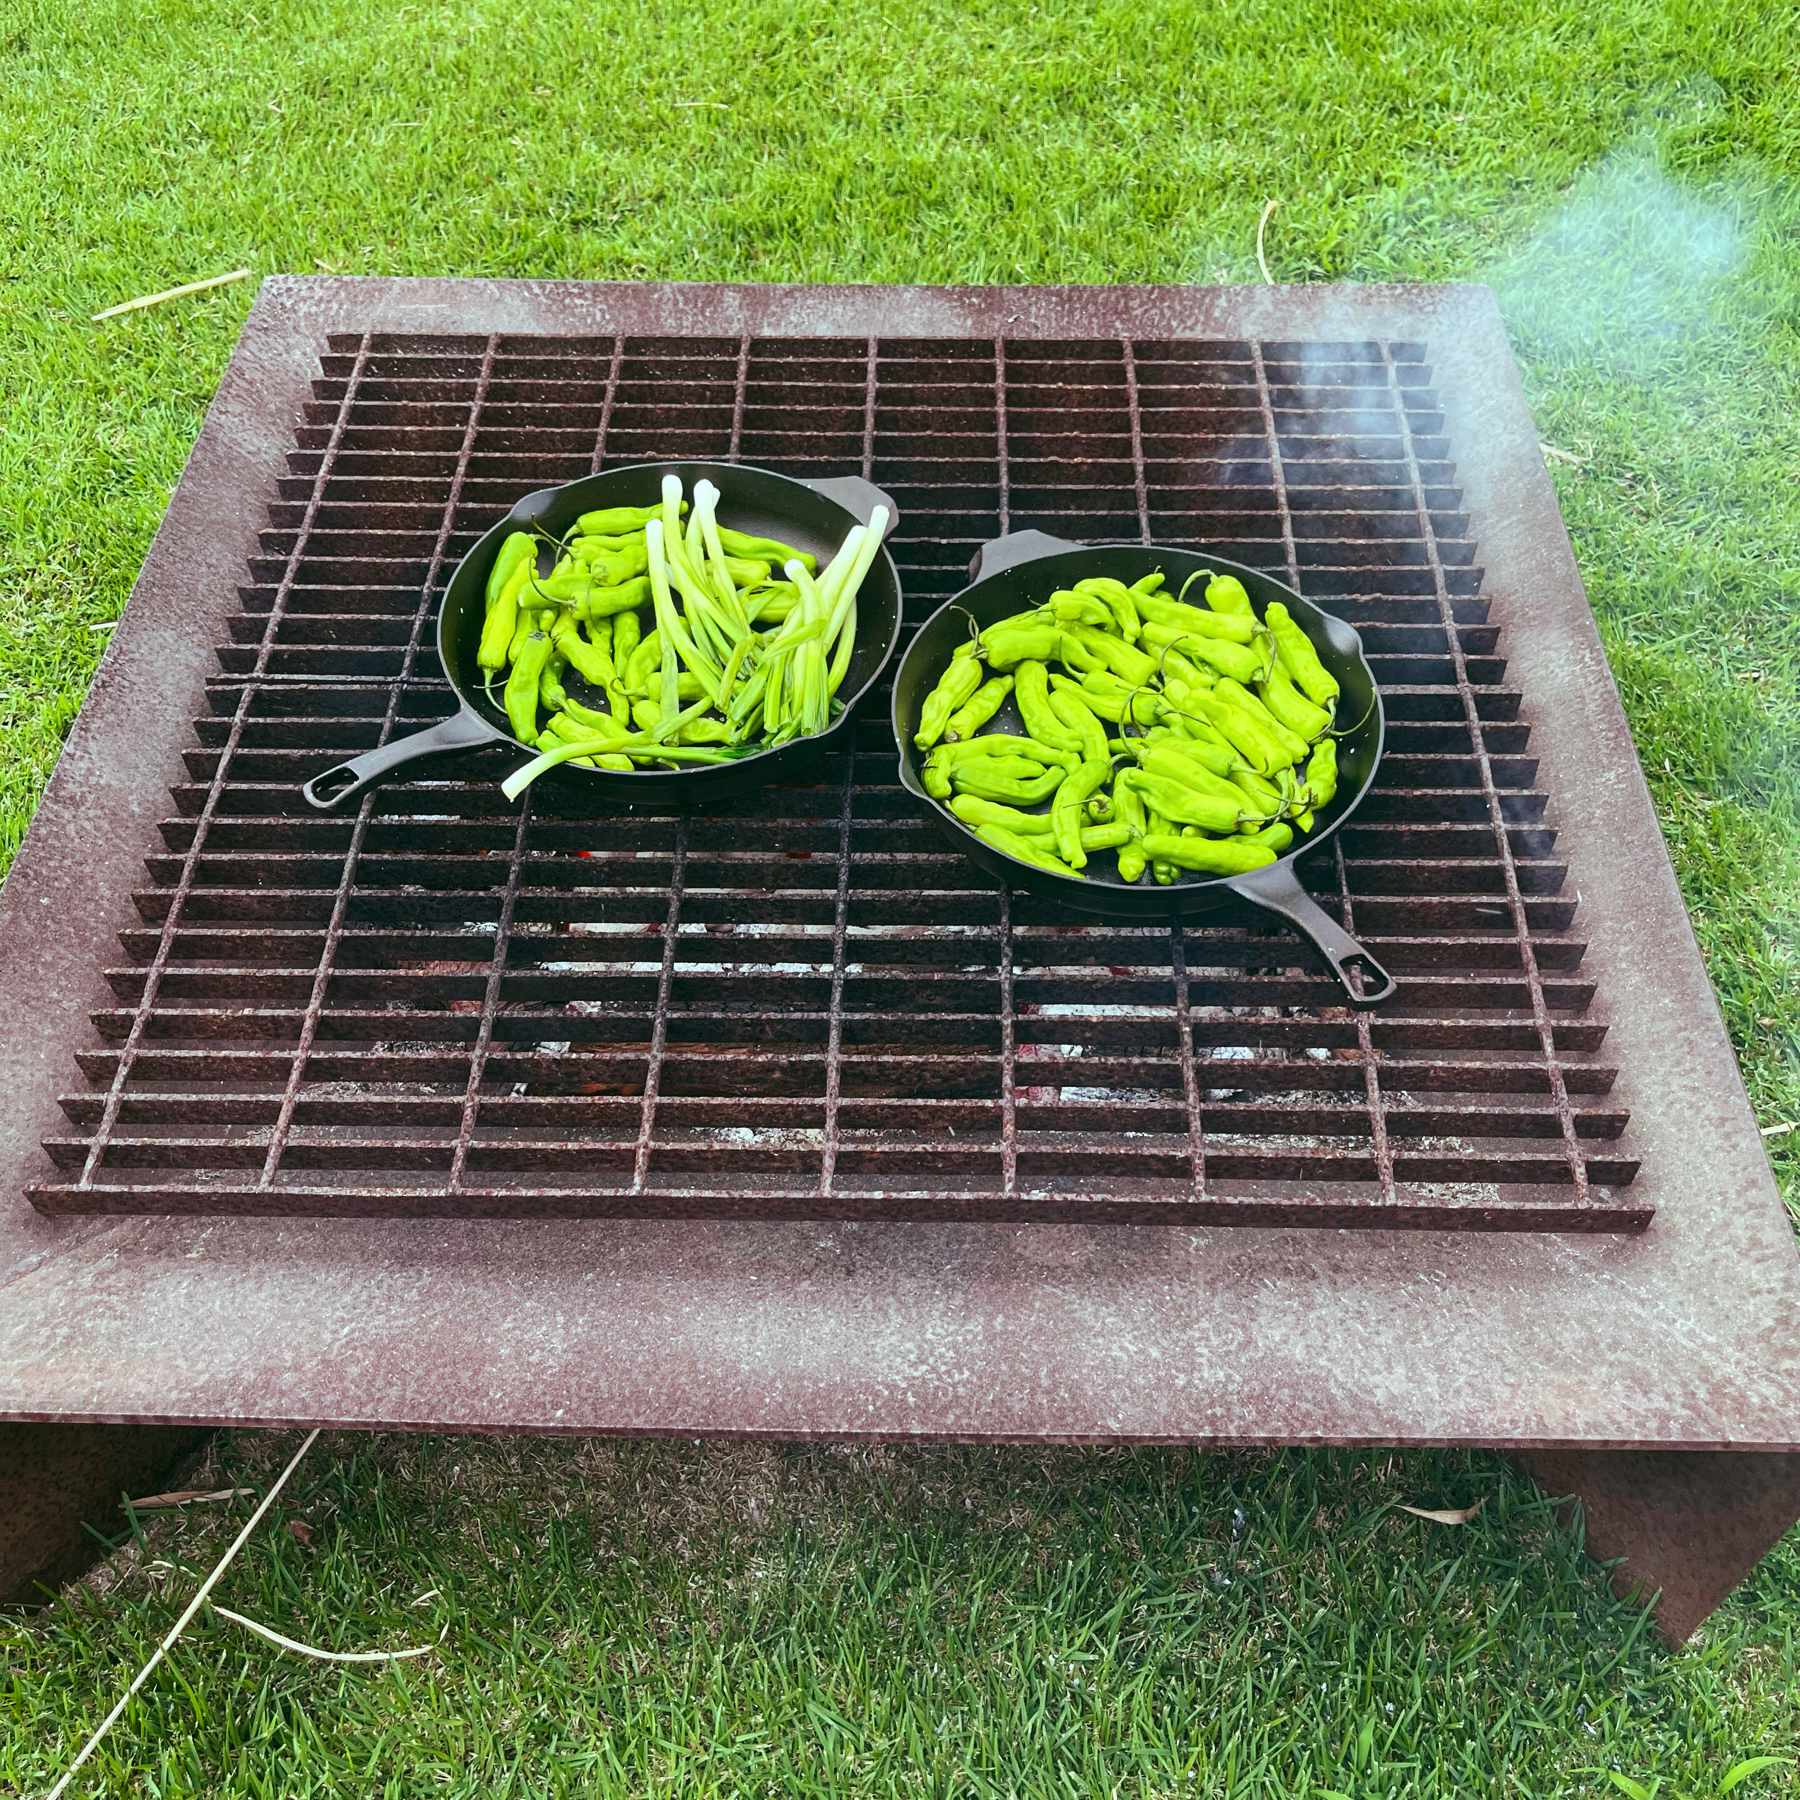 Two cast iron pans sitting on a corten steel fire bit with a grill, each pan holding shishito peppers and one having spring onions as well